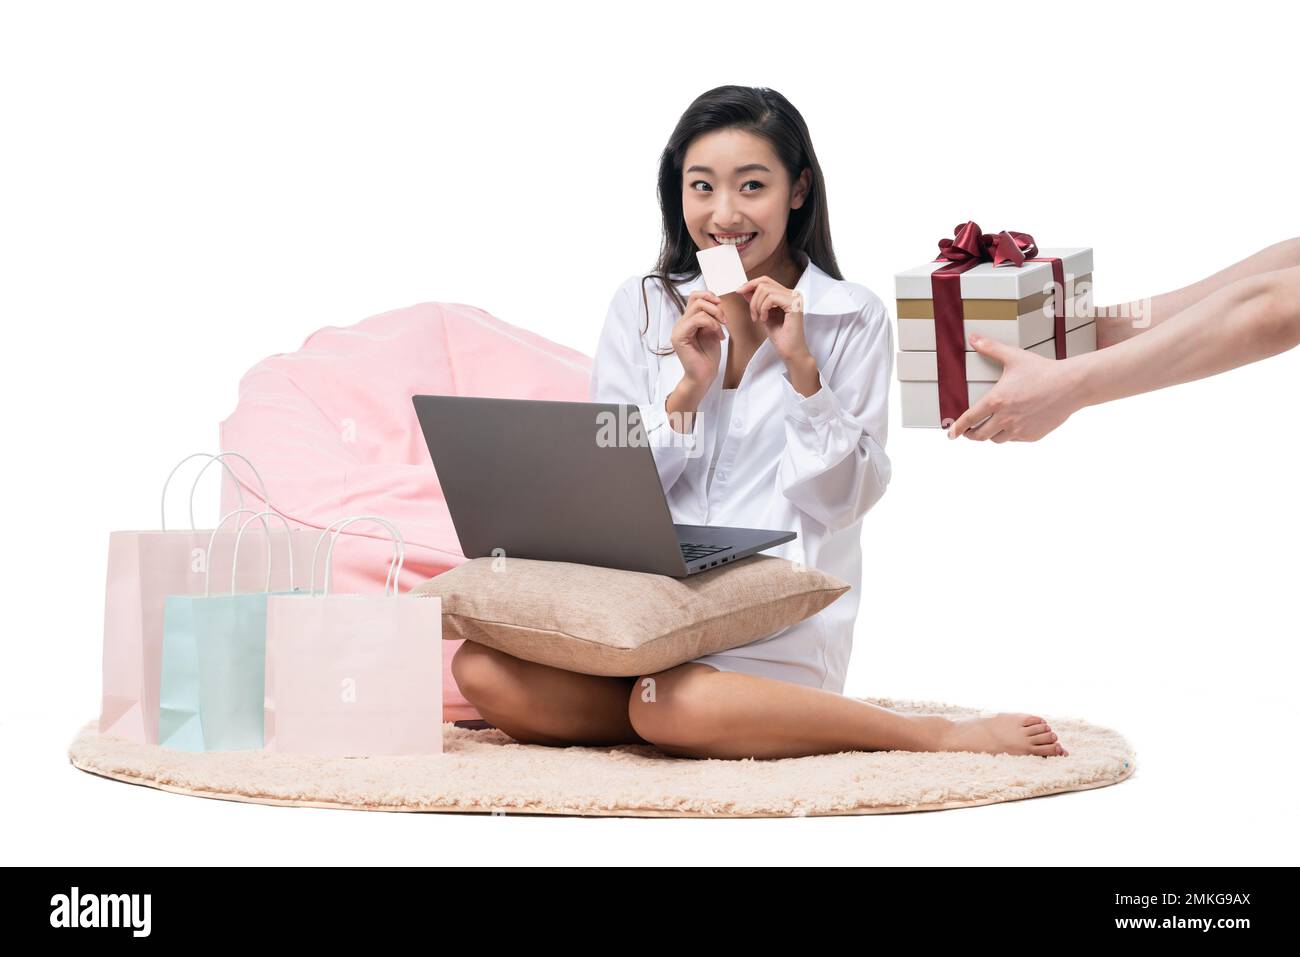 Young woman to sign for a gift Stock Photo